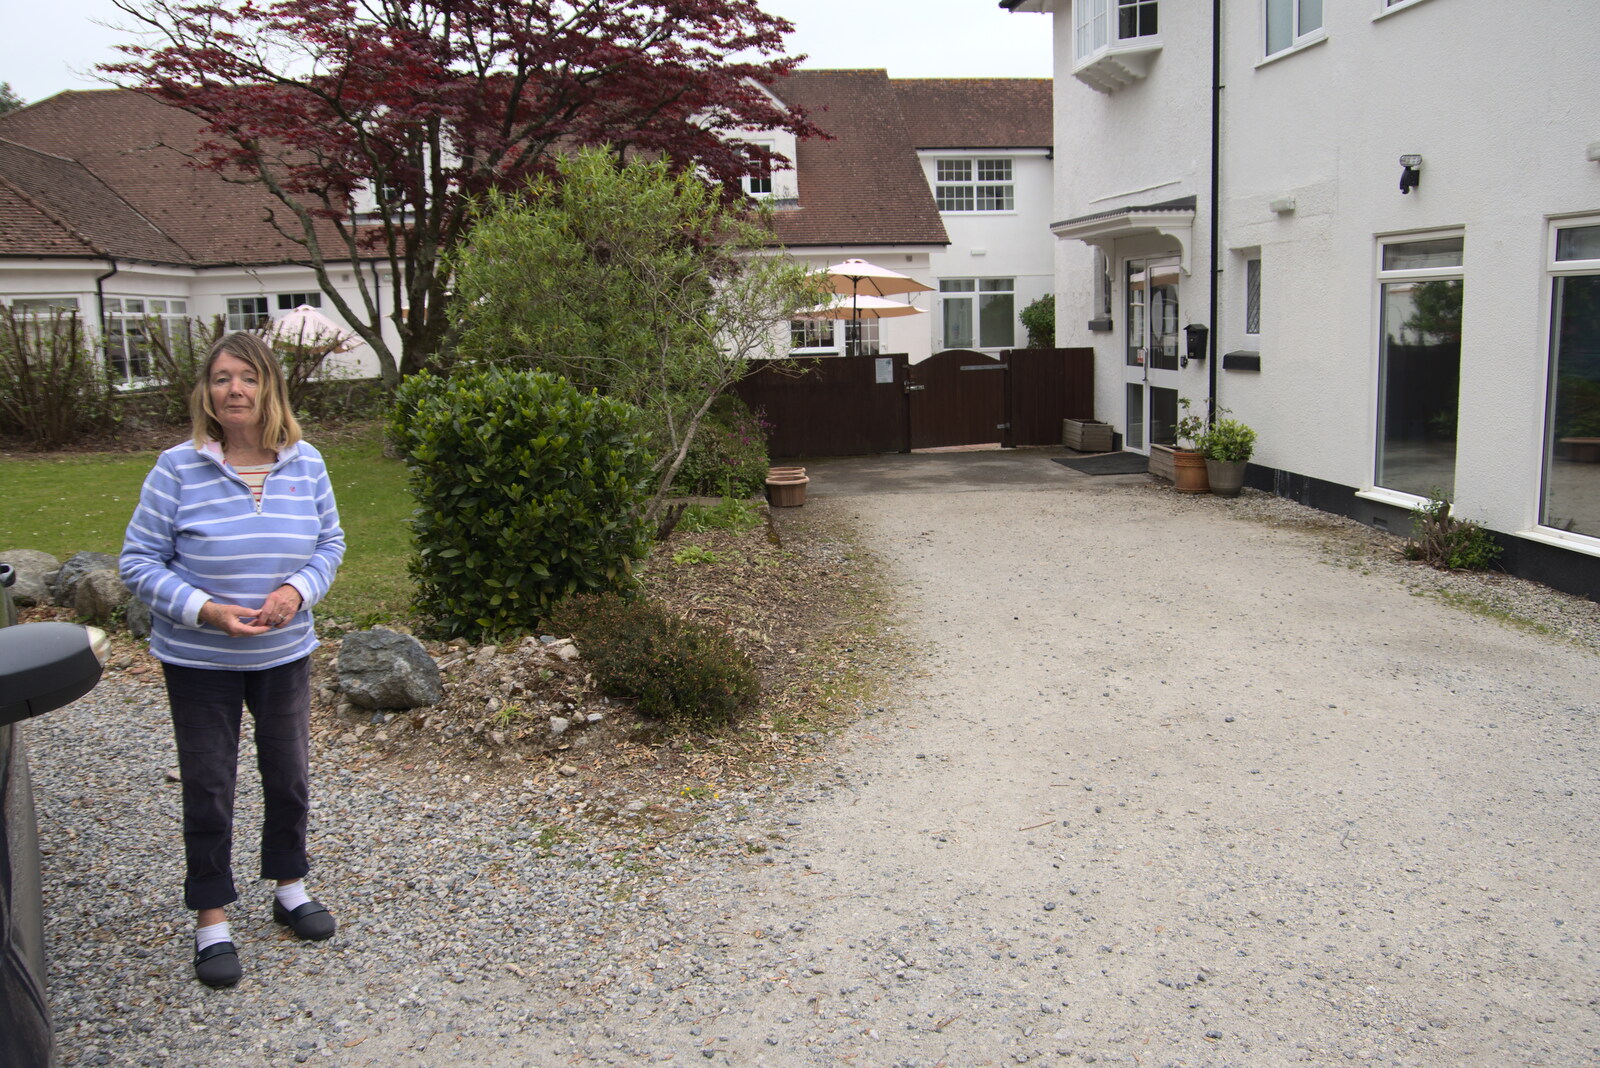 Mother outside her home from A Trip to Grandma J's, Spreyton, Devon - 2nd June 2021